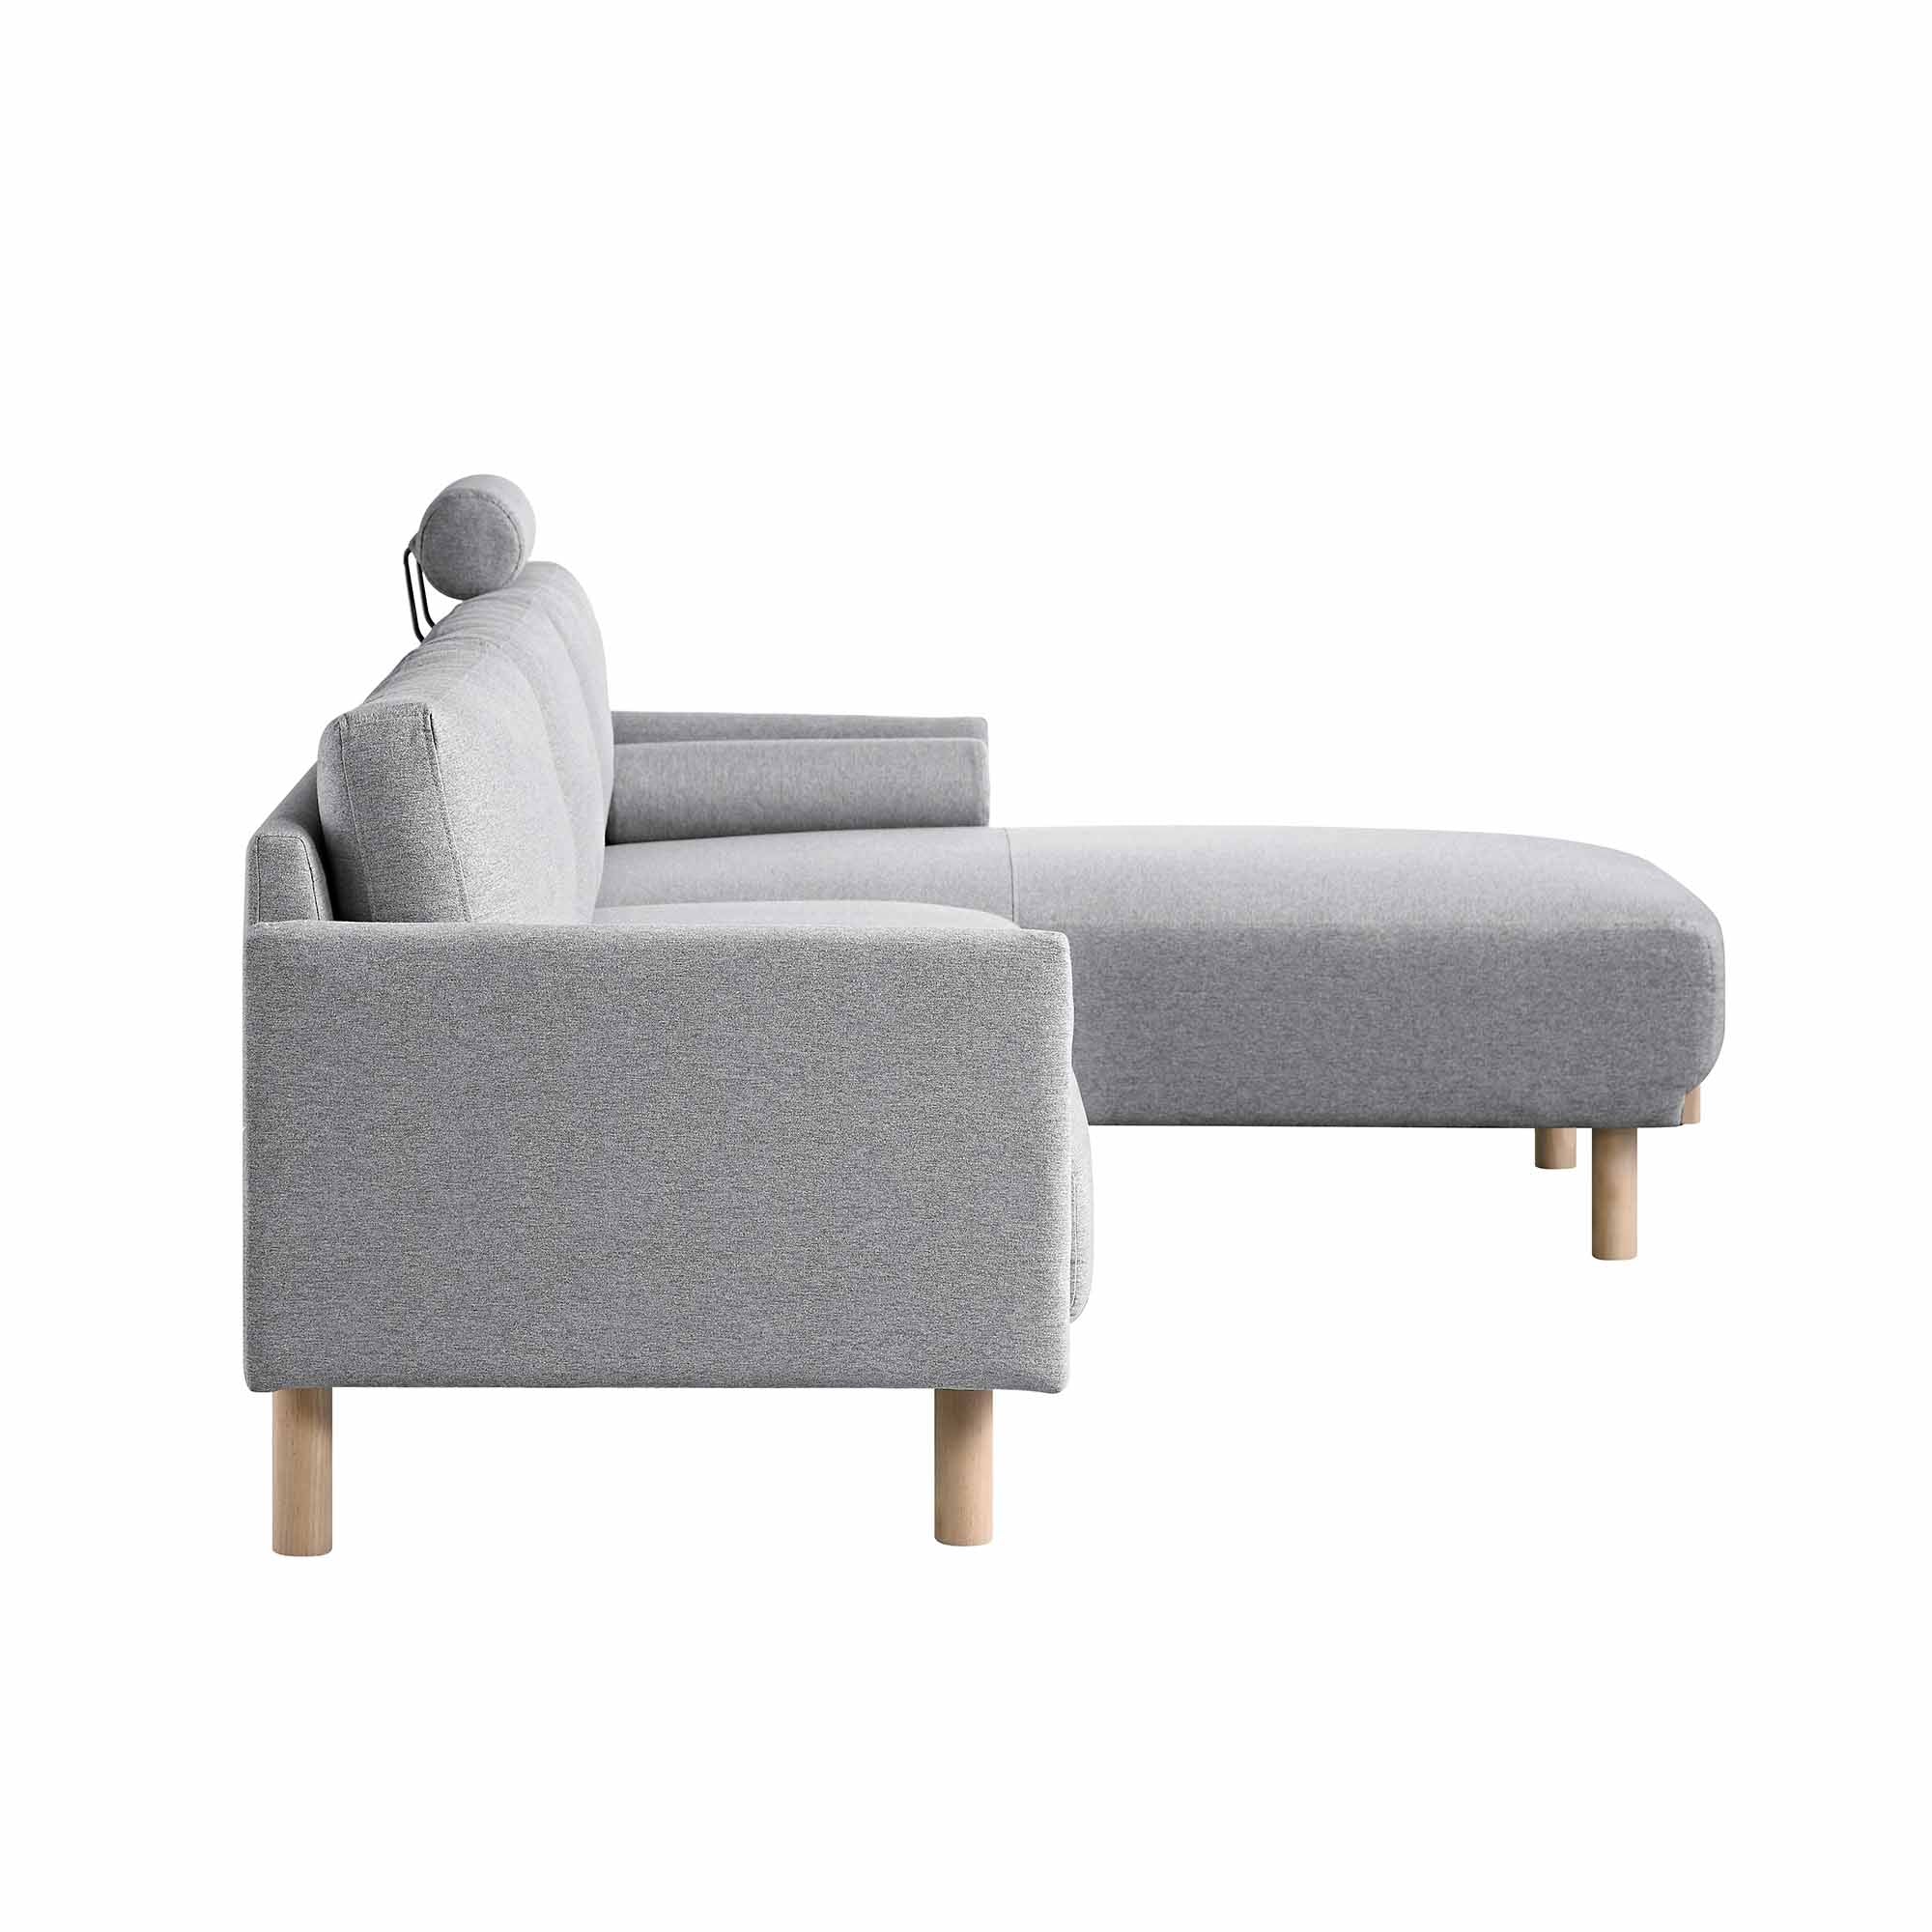 Timber Grey Marl Fabric Sofa, Large 3-Seater Chaise Sofa Right Hand